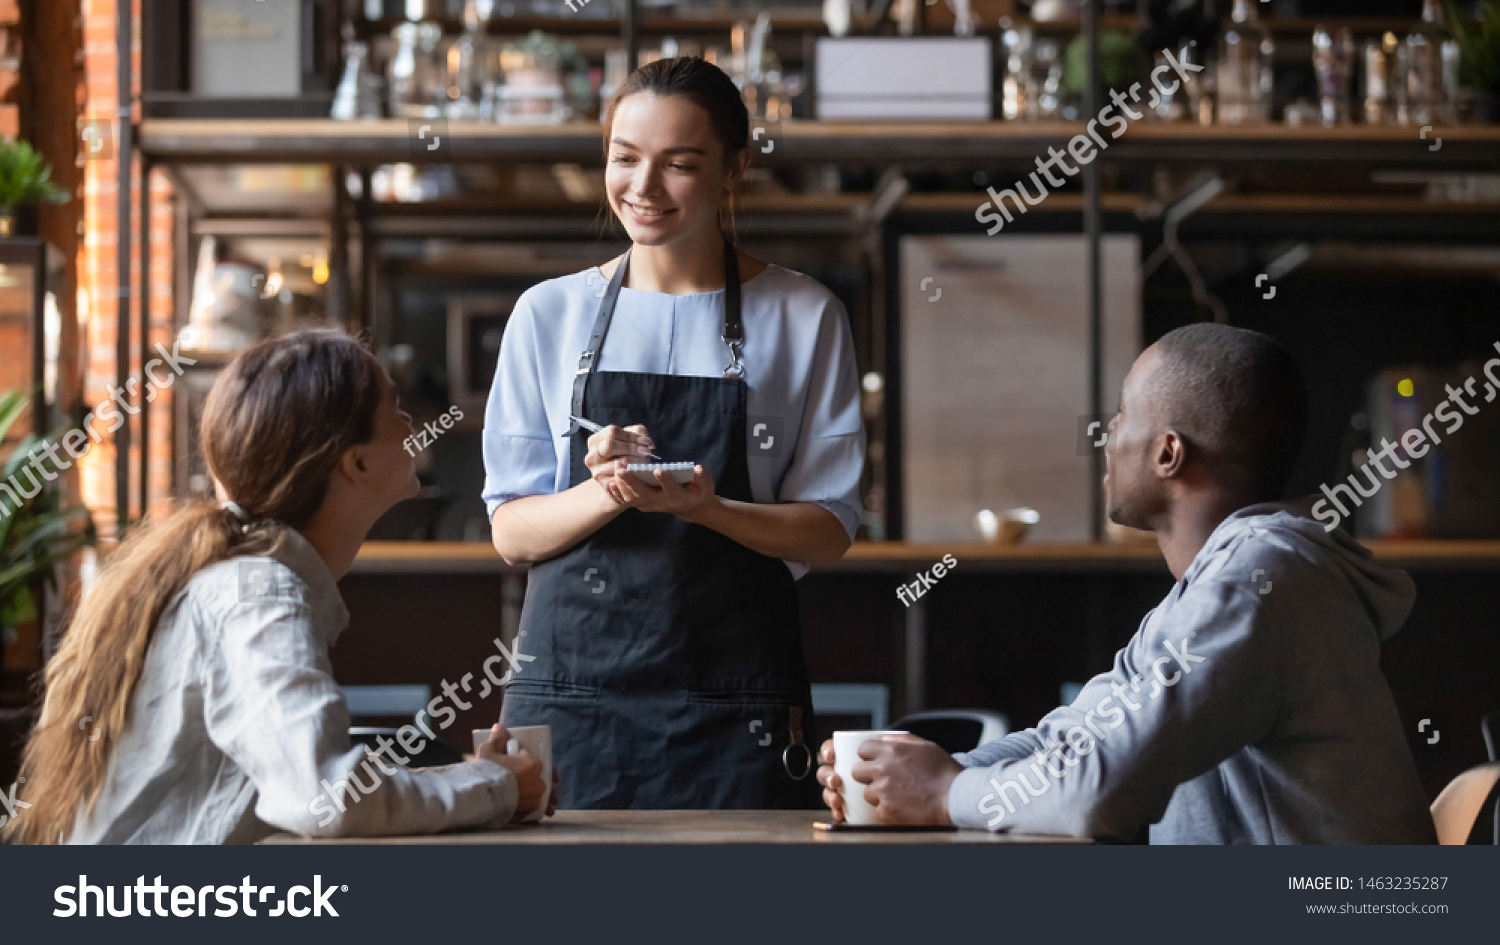 Smiling millennial waitress with notebook taking order from young multiracial client couple, diverse friends relax hang out in cafe or restaurant speak with staff enjoying good service and atmosphere #1463235287